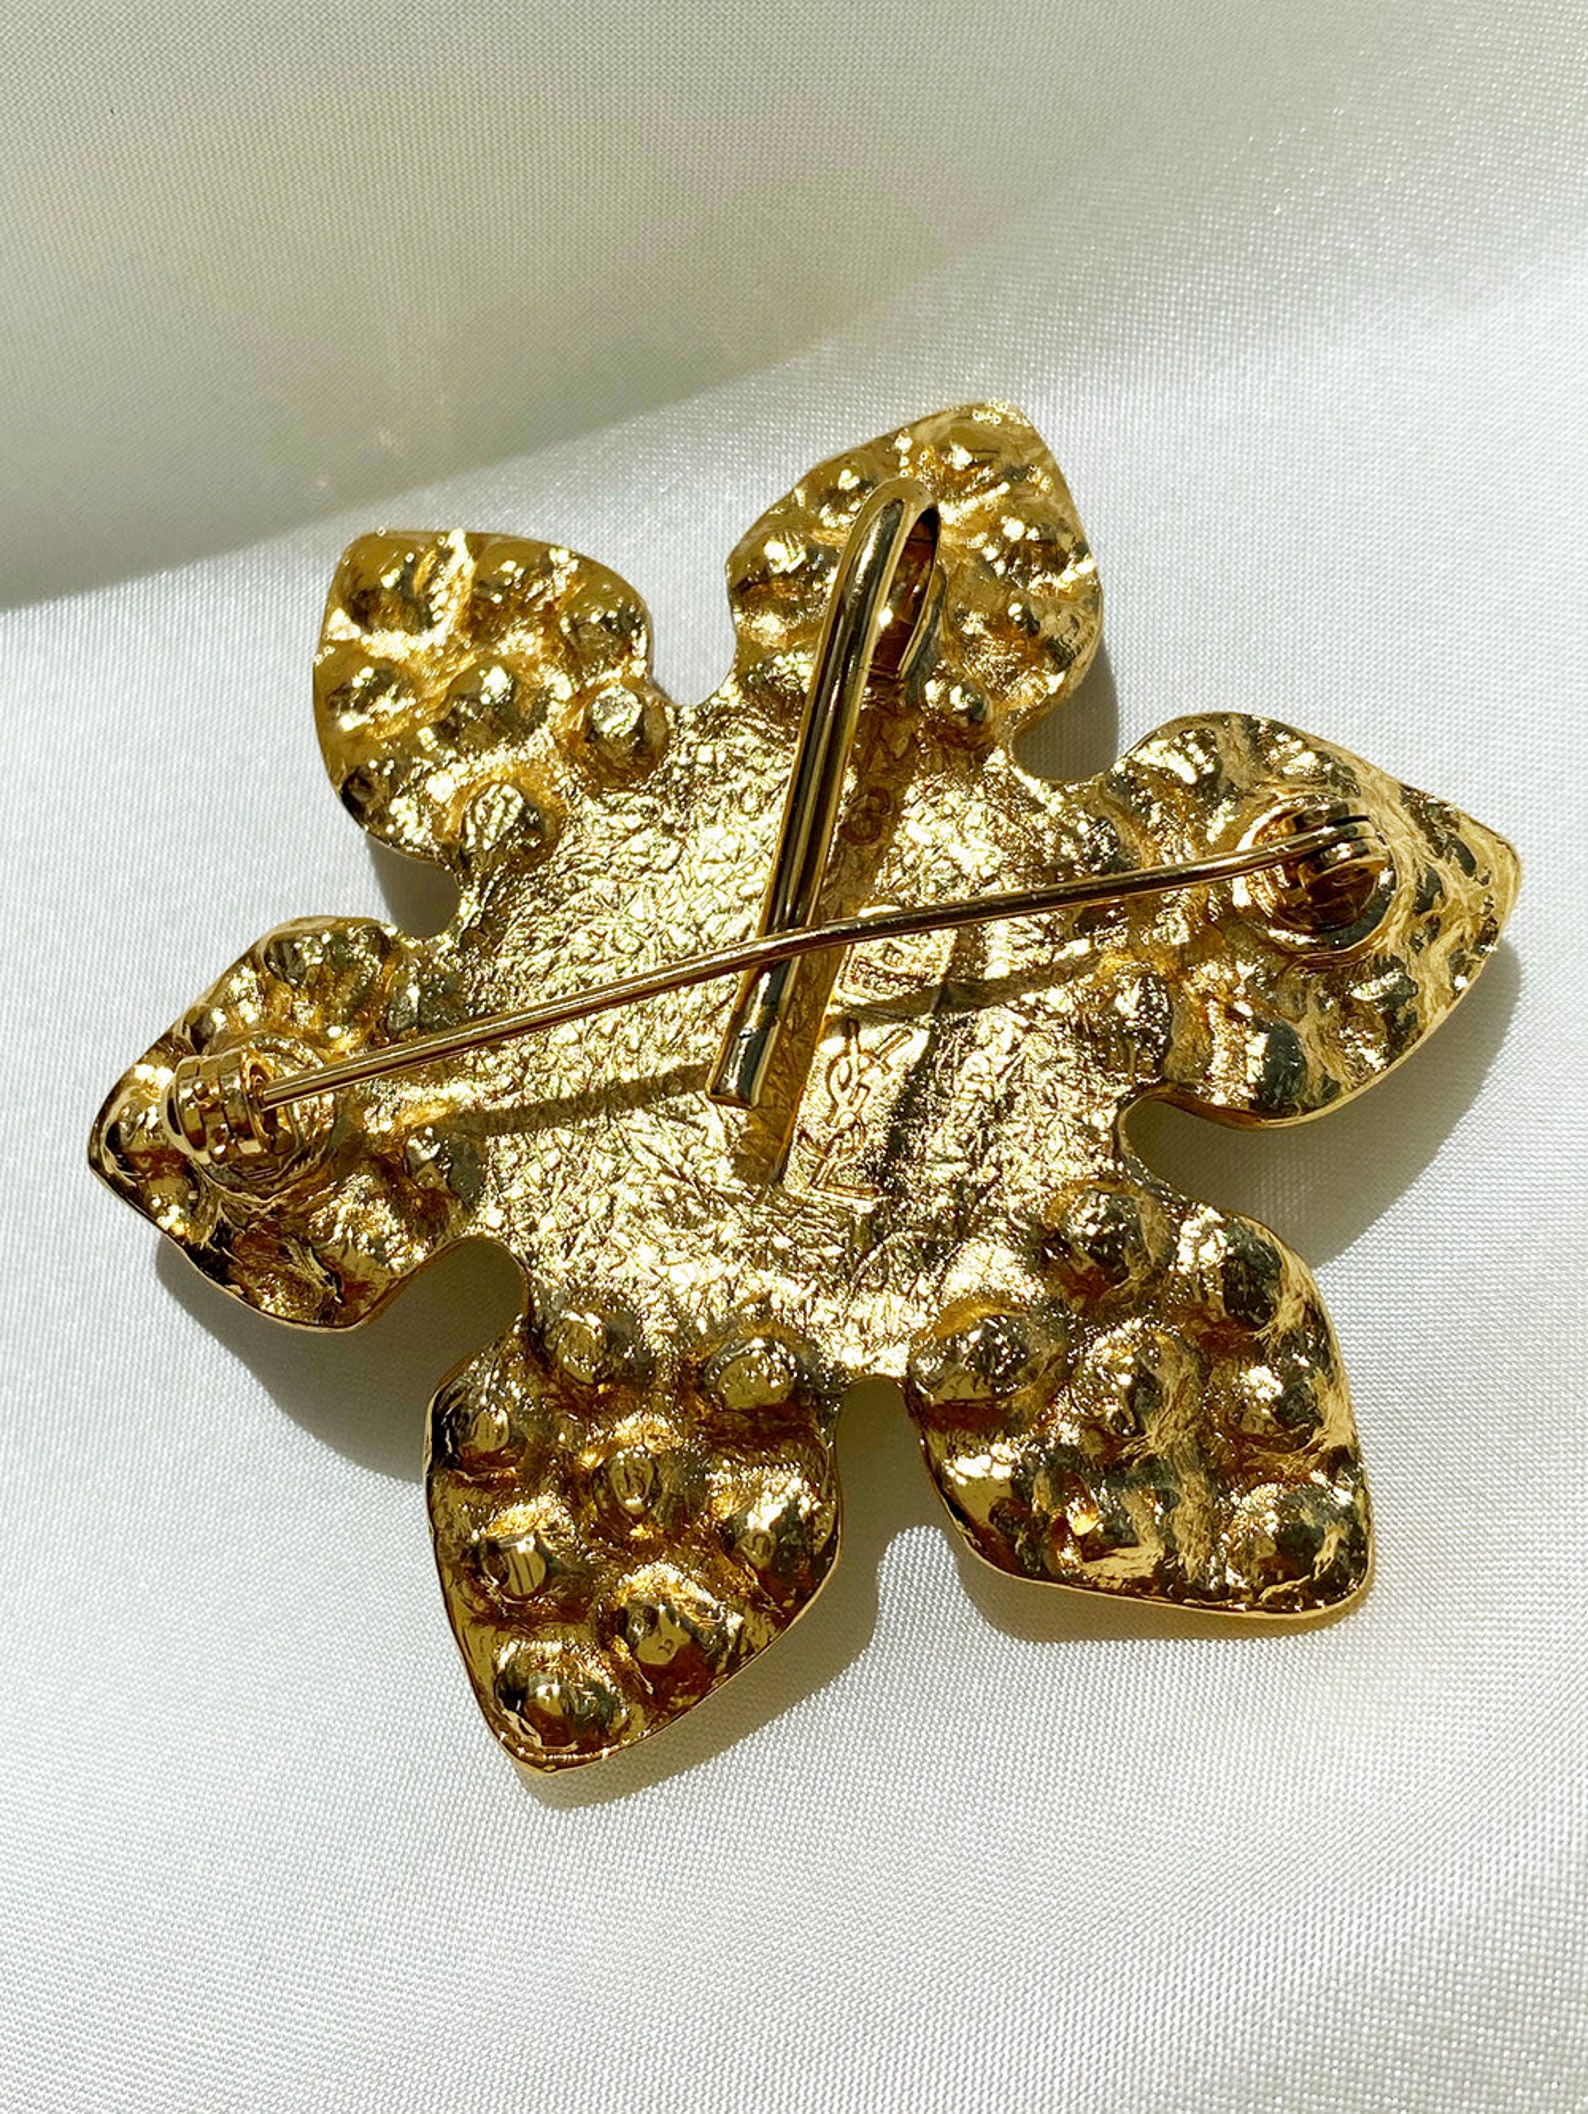 YVES SAINT LAURENT Vintage Goldplated Flower Brooch With White ...